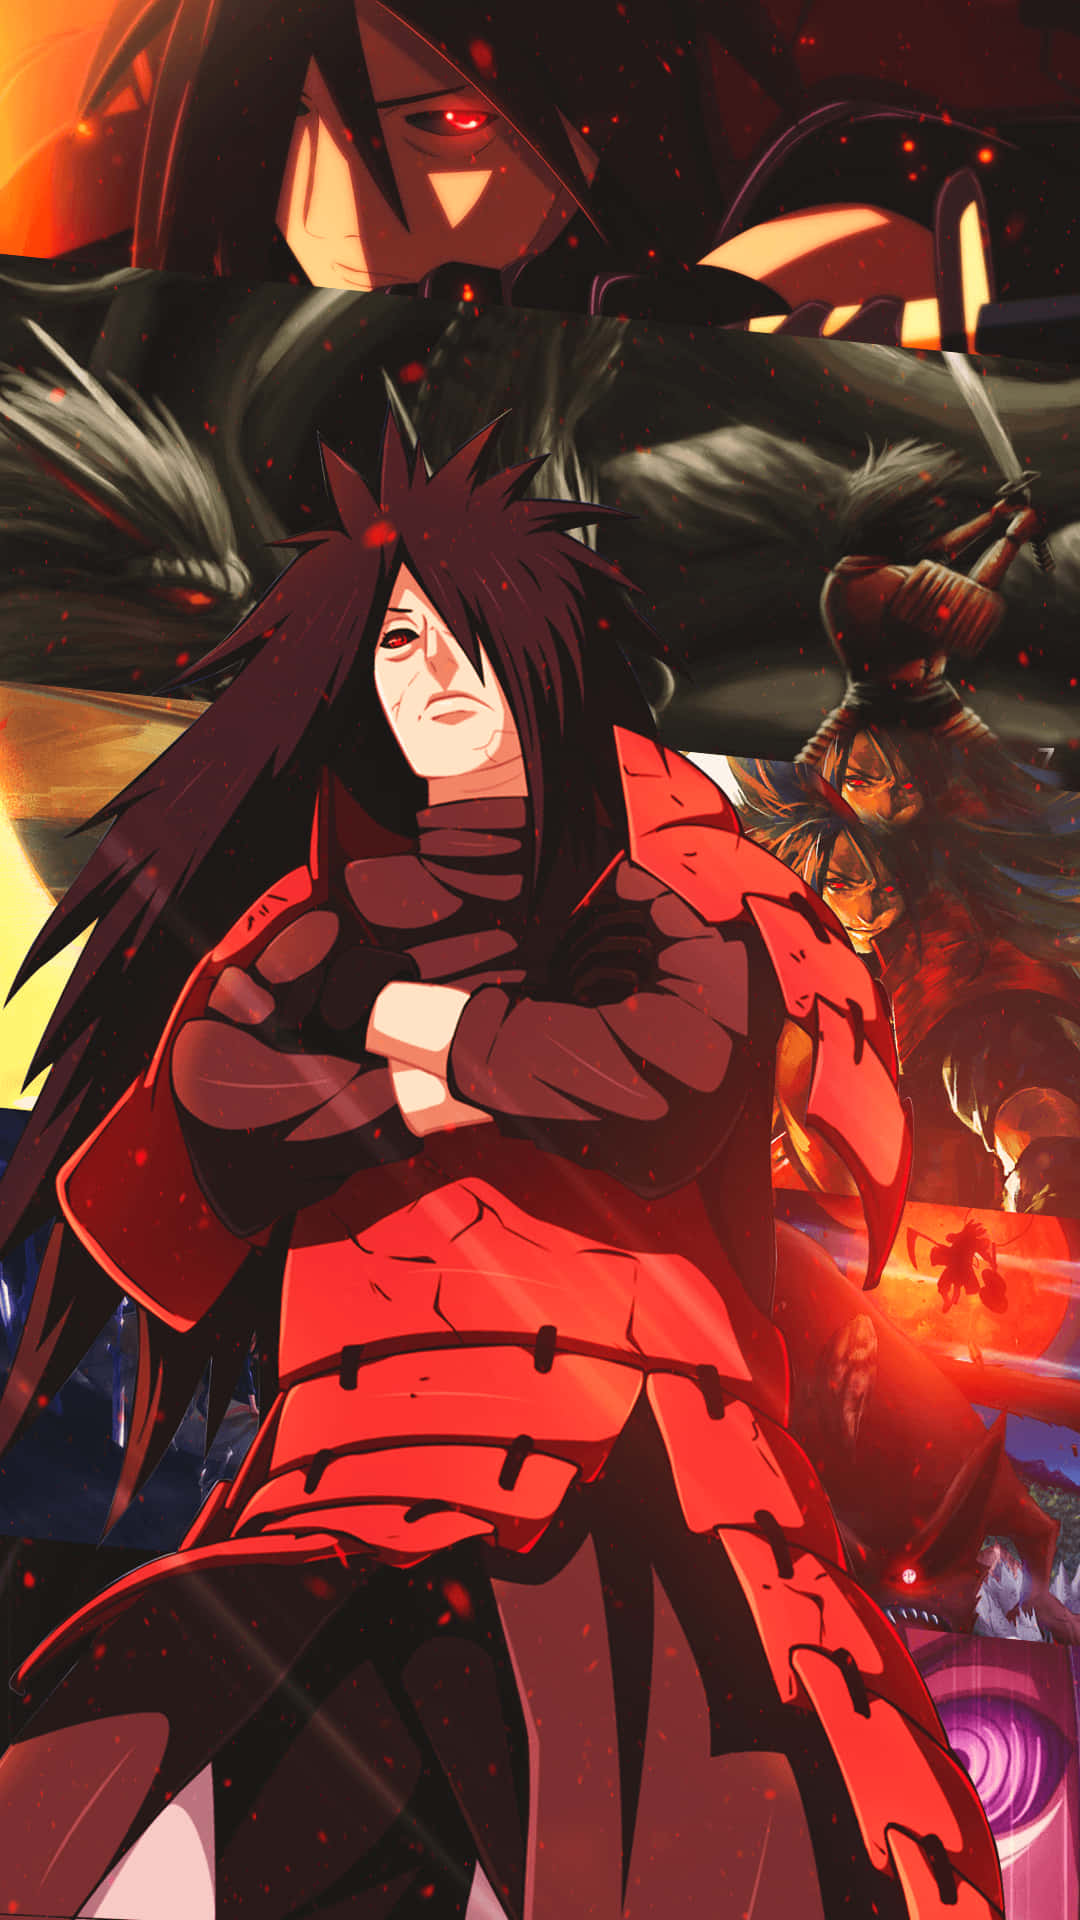 Relax and reflect with the mysterious Madara Cool. Wallpaper